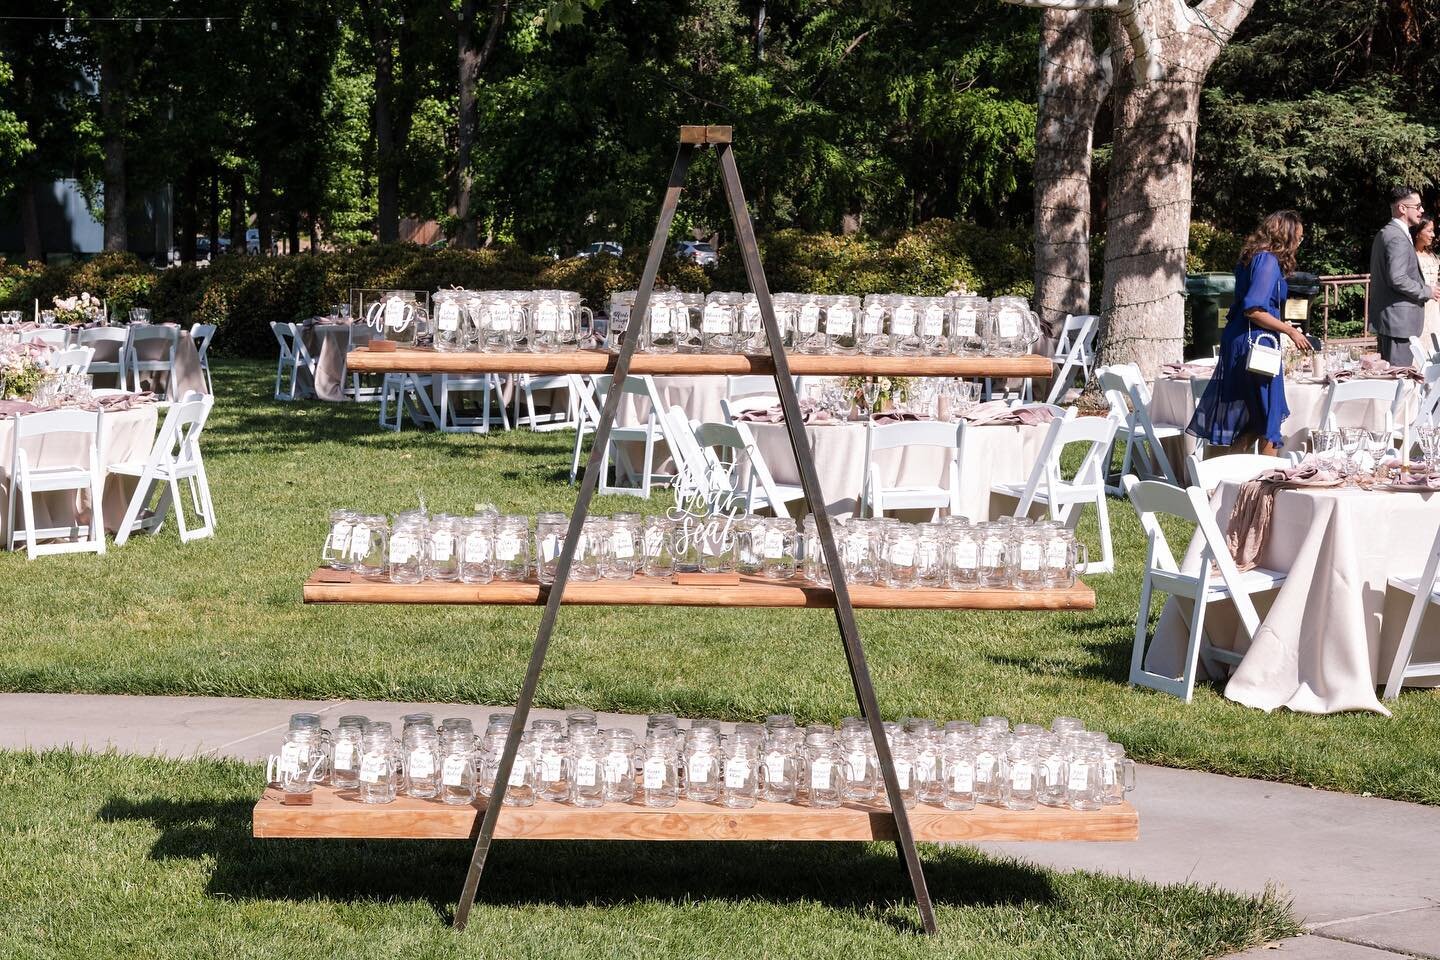 Creative seating charts can double as decor and a gift for the guests! 🥰 I wrote each guest&rsquo;s name on a tag attached to these mason jars, and I love how it turned out! Brilliant planning by @allthedeets_ 💕